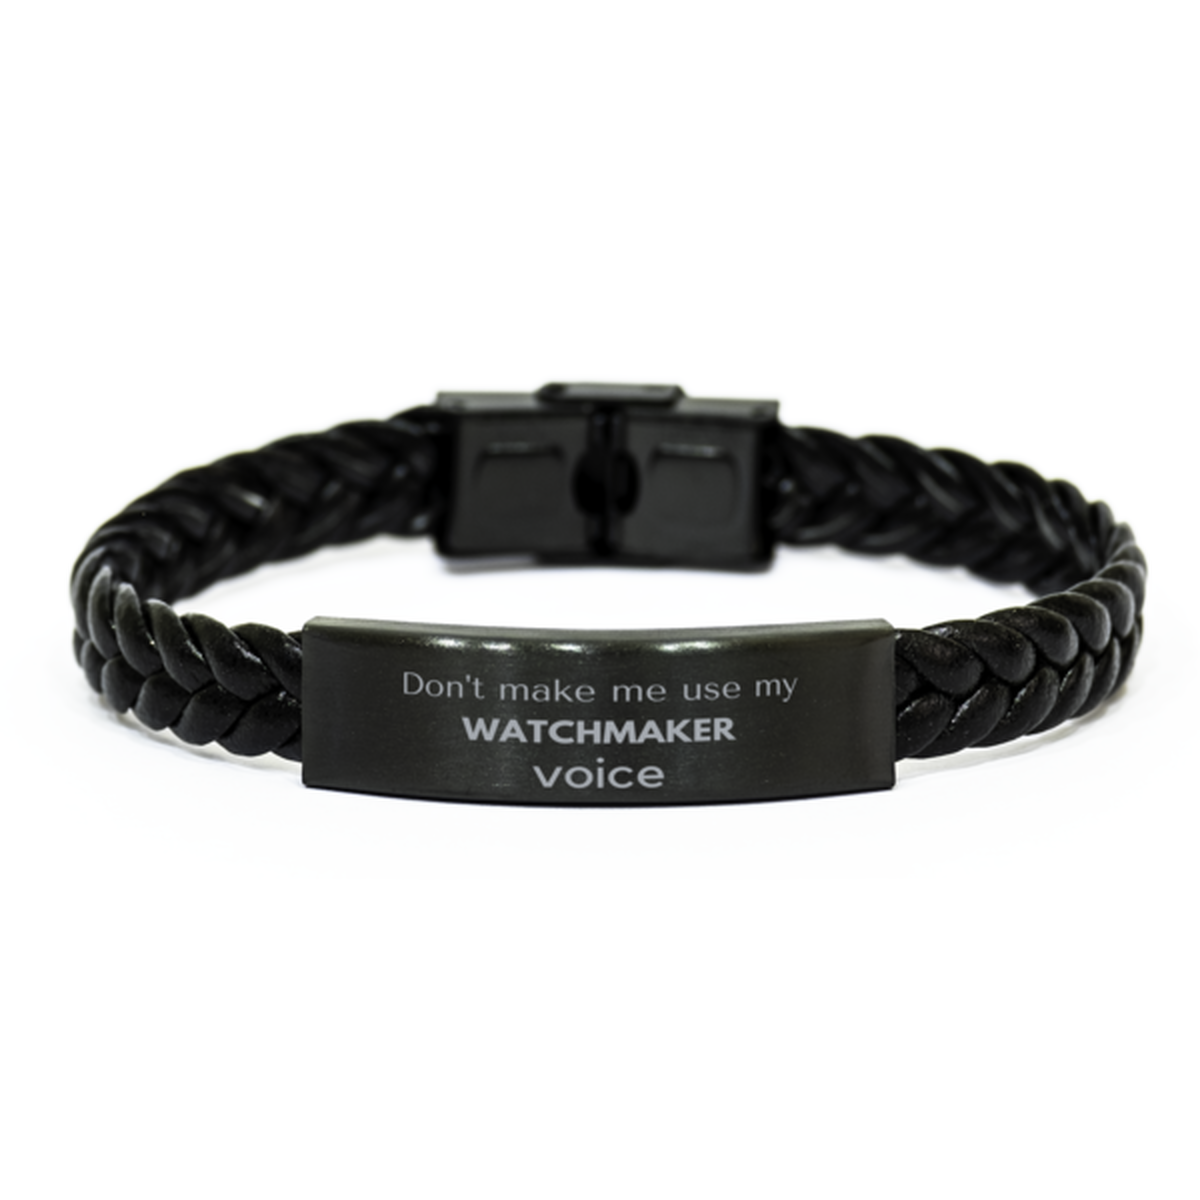 Don't make me use my Watchmaker voice, Sarcasm Watchmaker Gifts, Christmas Watchmaker Braided Leather Bracelet Birthday Unique Gifts For Watchmaker Coworkers, Men, Women, Colleague, Friends